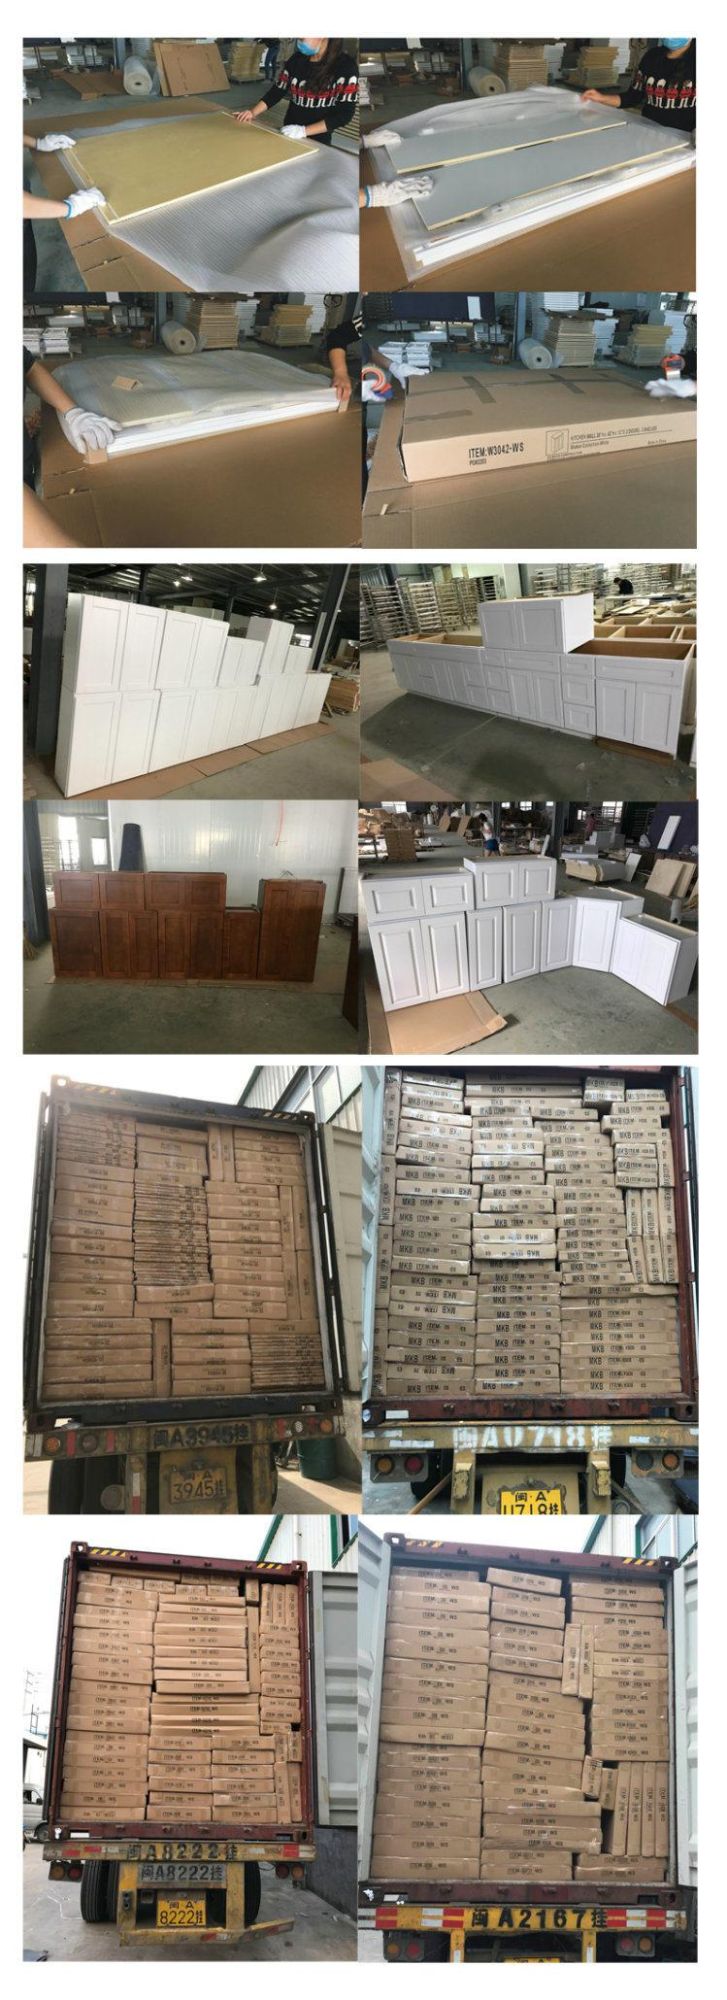 (Factory) American Style Furniture Kitchen Cabinets Rta Flat Pack